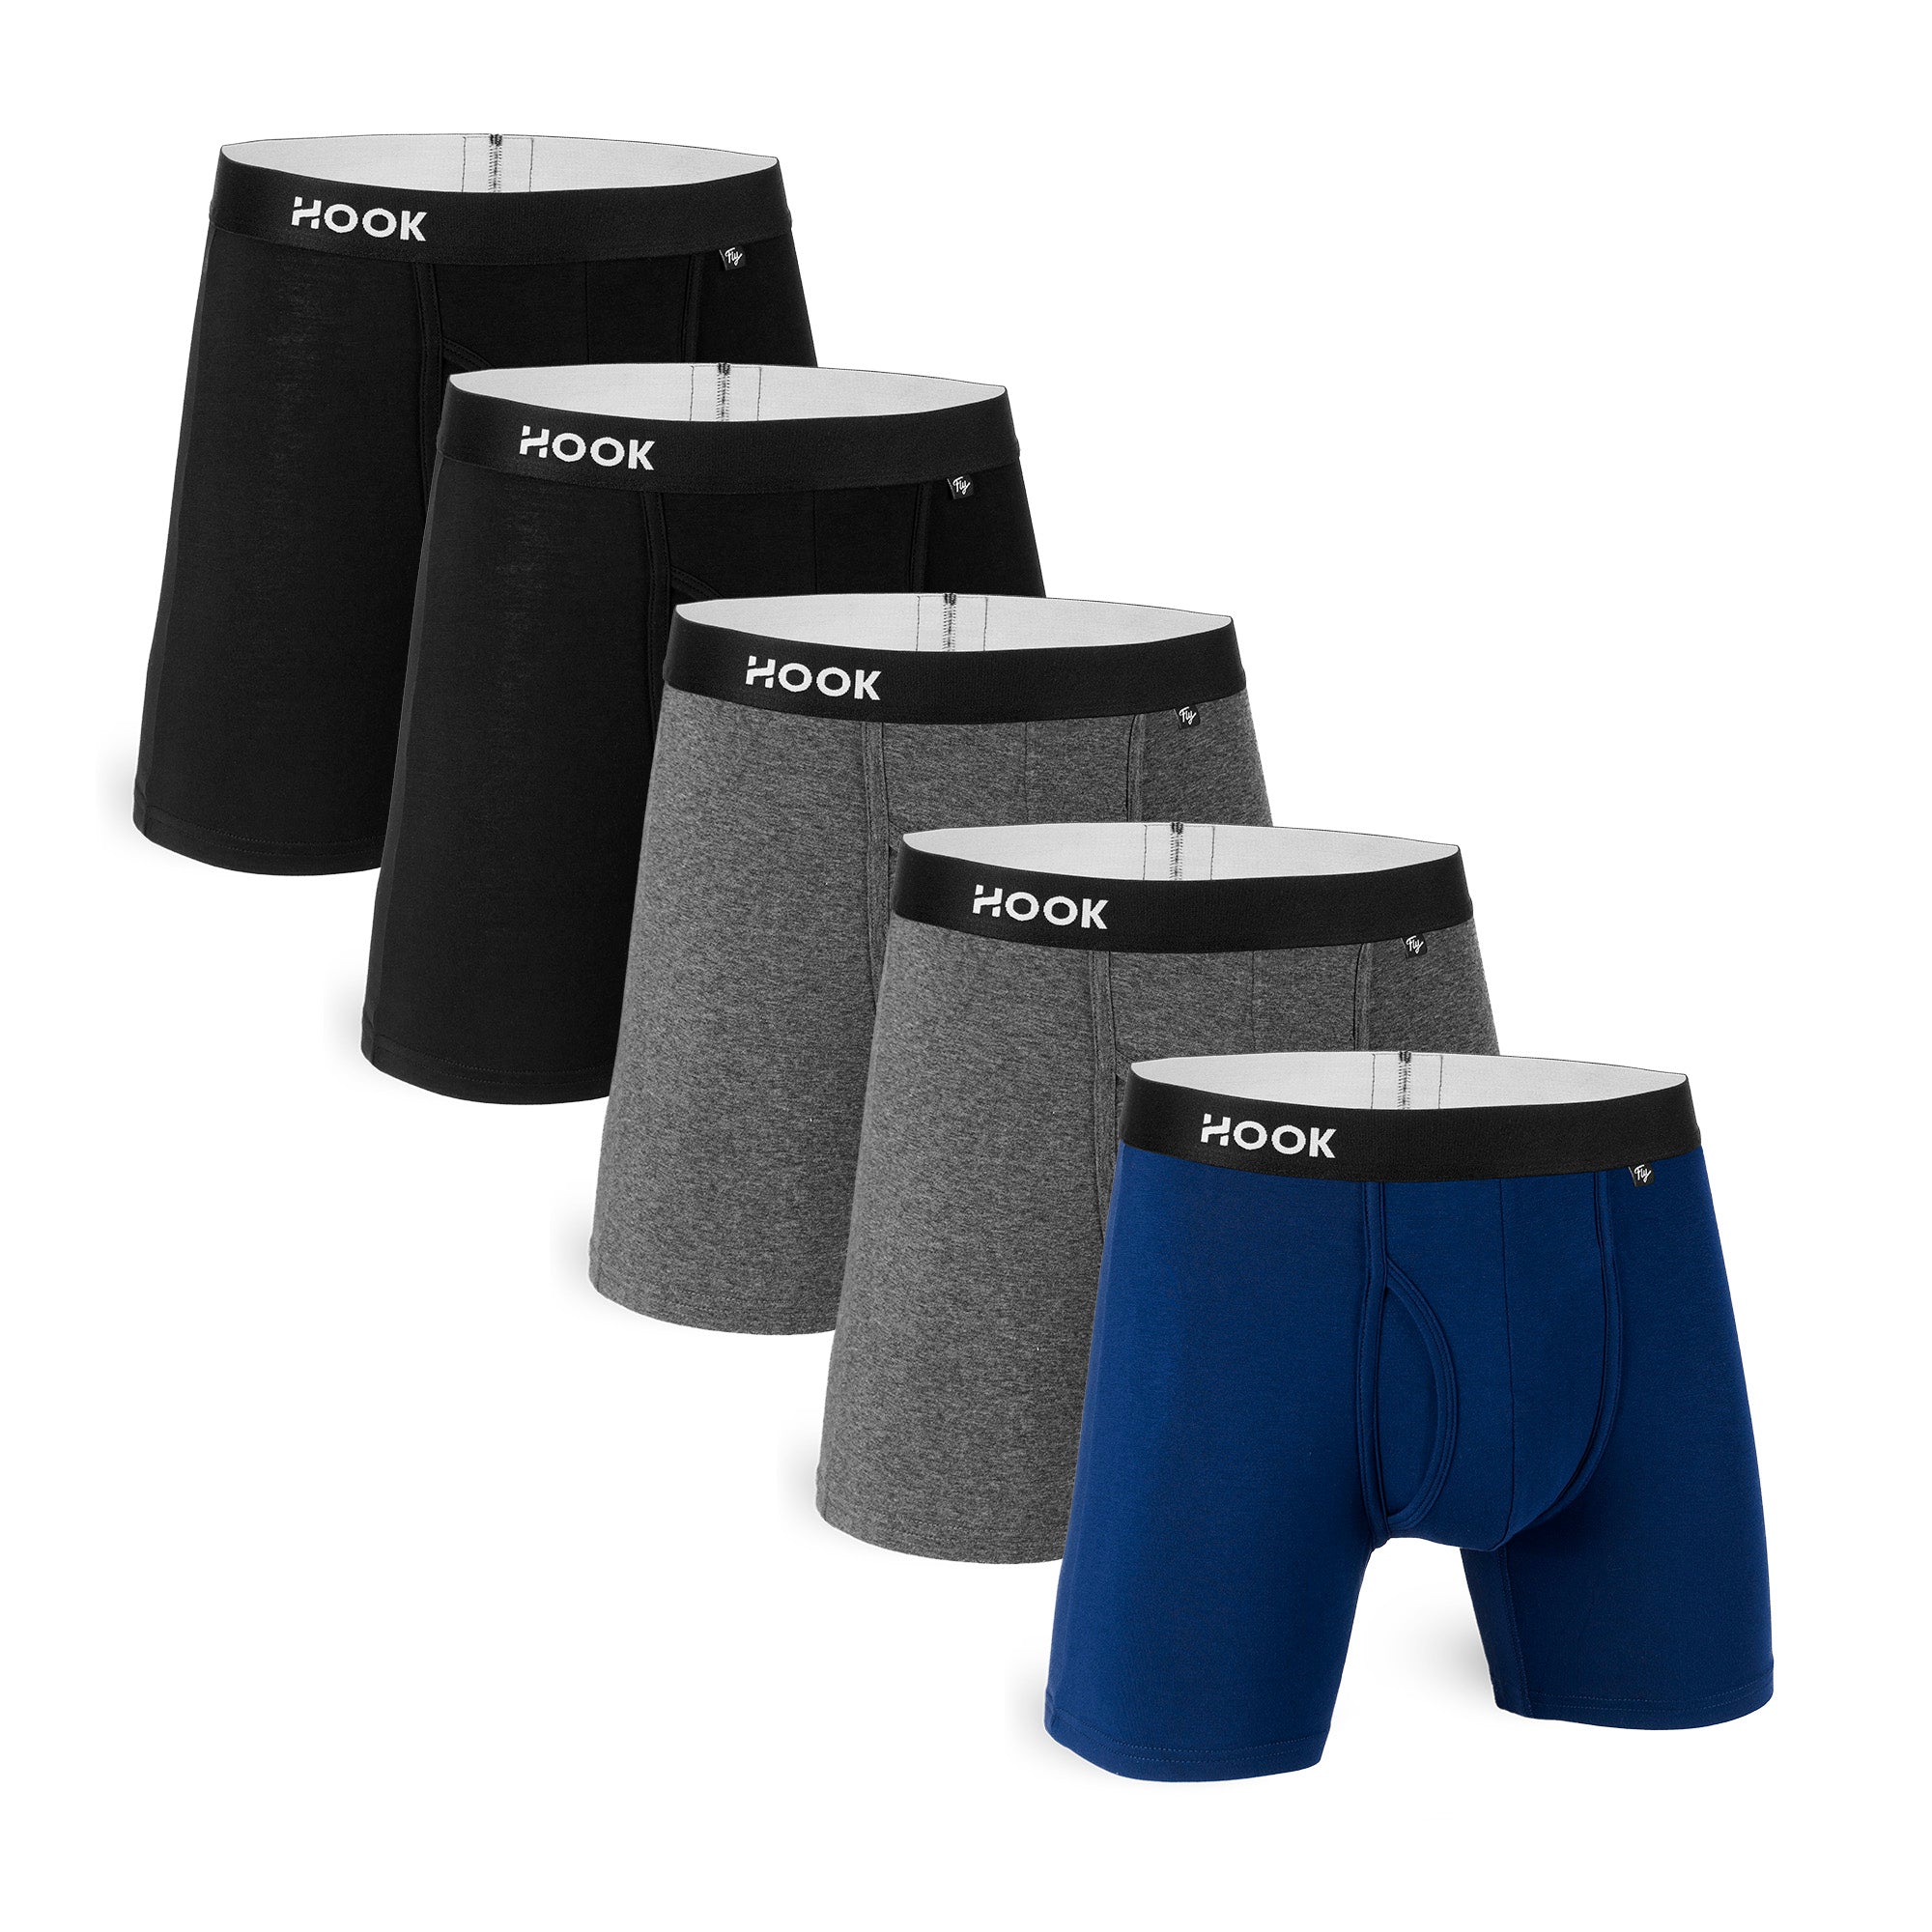 5 Fly Boxer Brief : Black, Charcoal, Navy